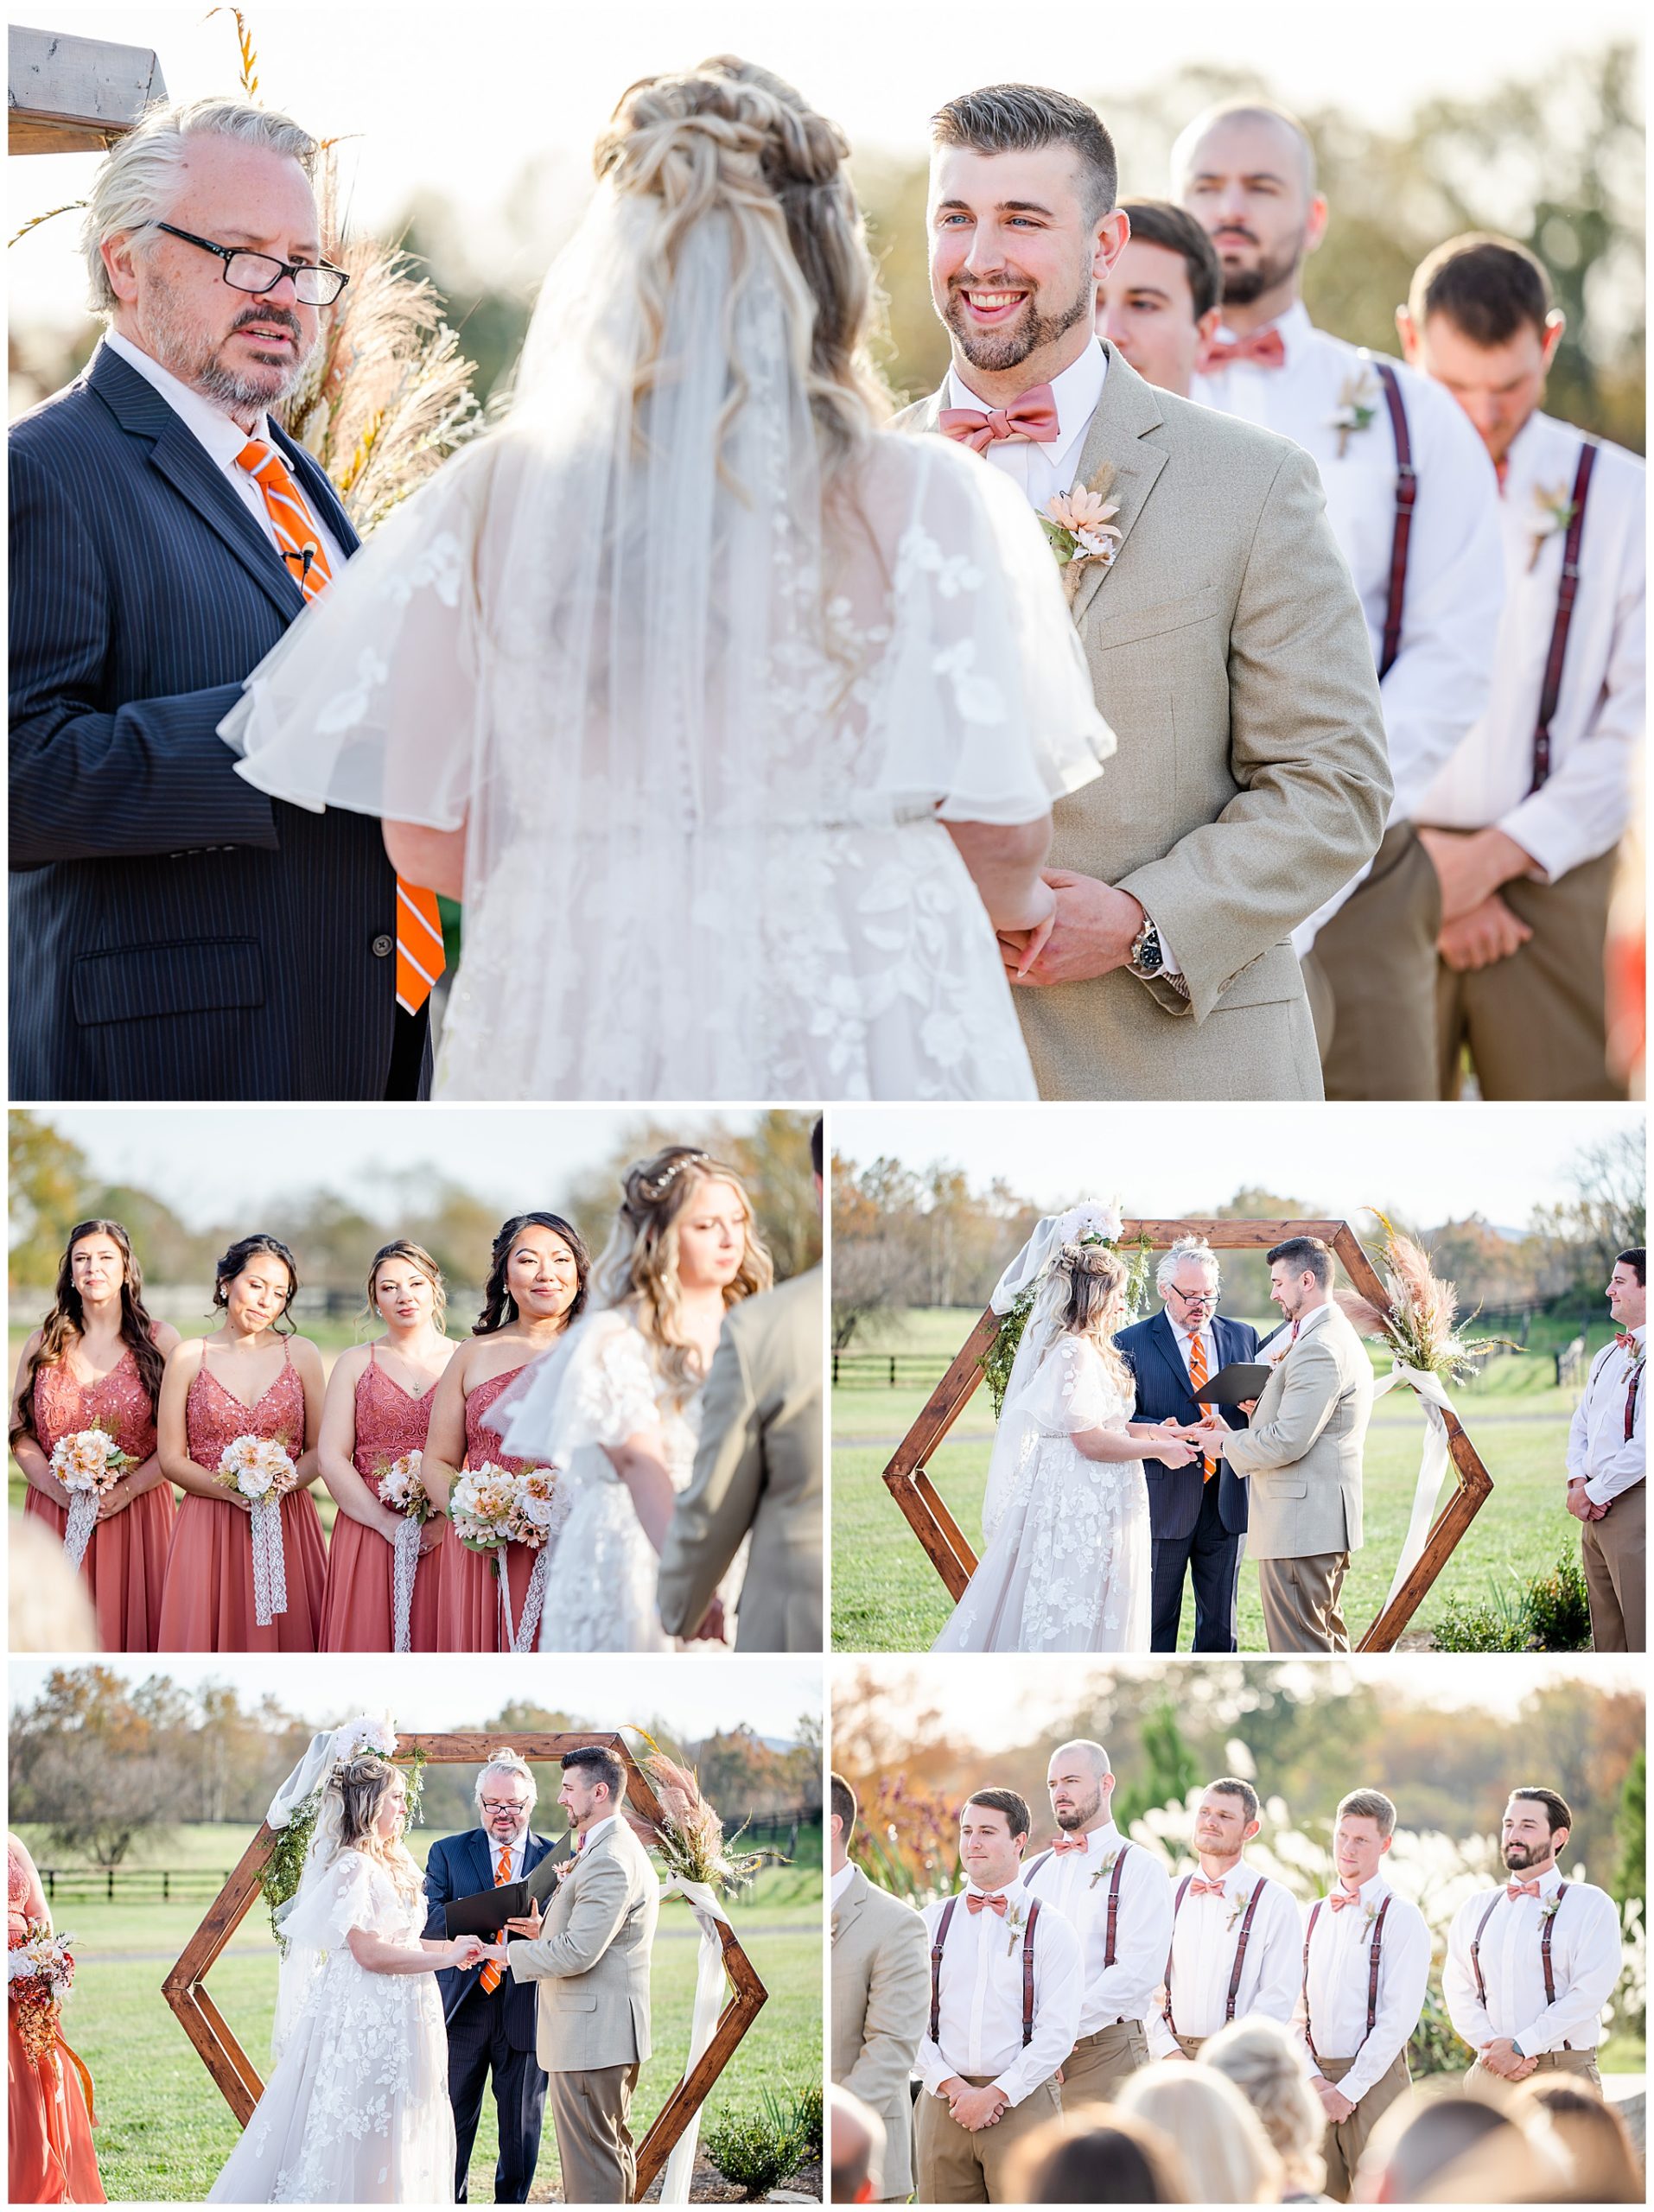 fall colors Middleburg Virginia wedding, Middleburg wedding, Middleburg wedding photographer, Loudoun County wedding photographer, northern Virginia wedding photographer, Middleburg Barn wedding, autumn wedding aesthetic, barn wedding aesthetic, elegant barn wedding, DC wedding photographer, Rachel E.H. Photography, bride and groom at alter, bride and groom putting on each others rings